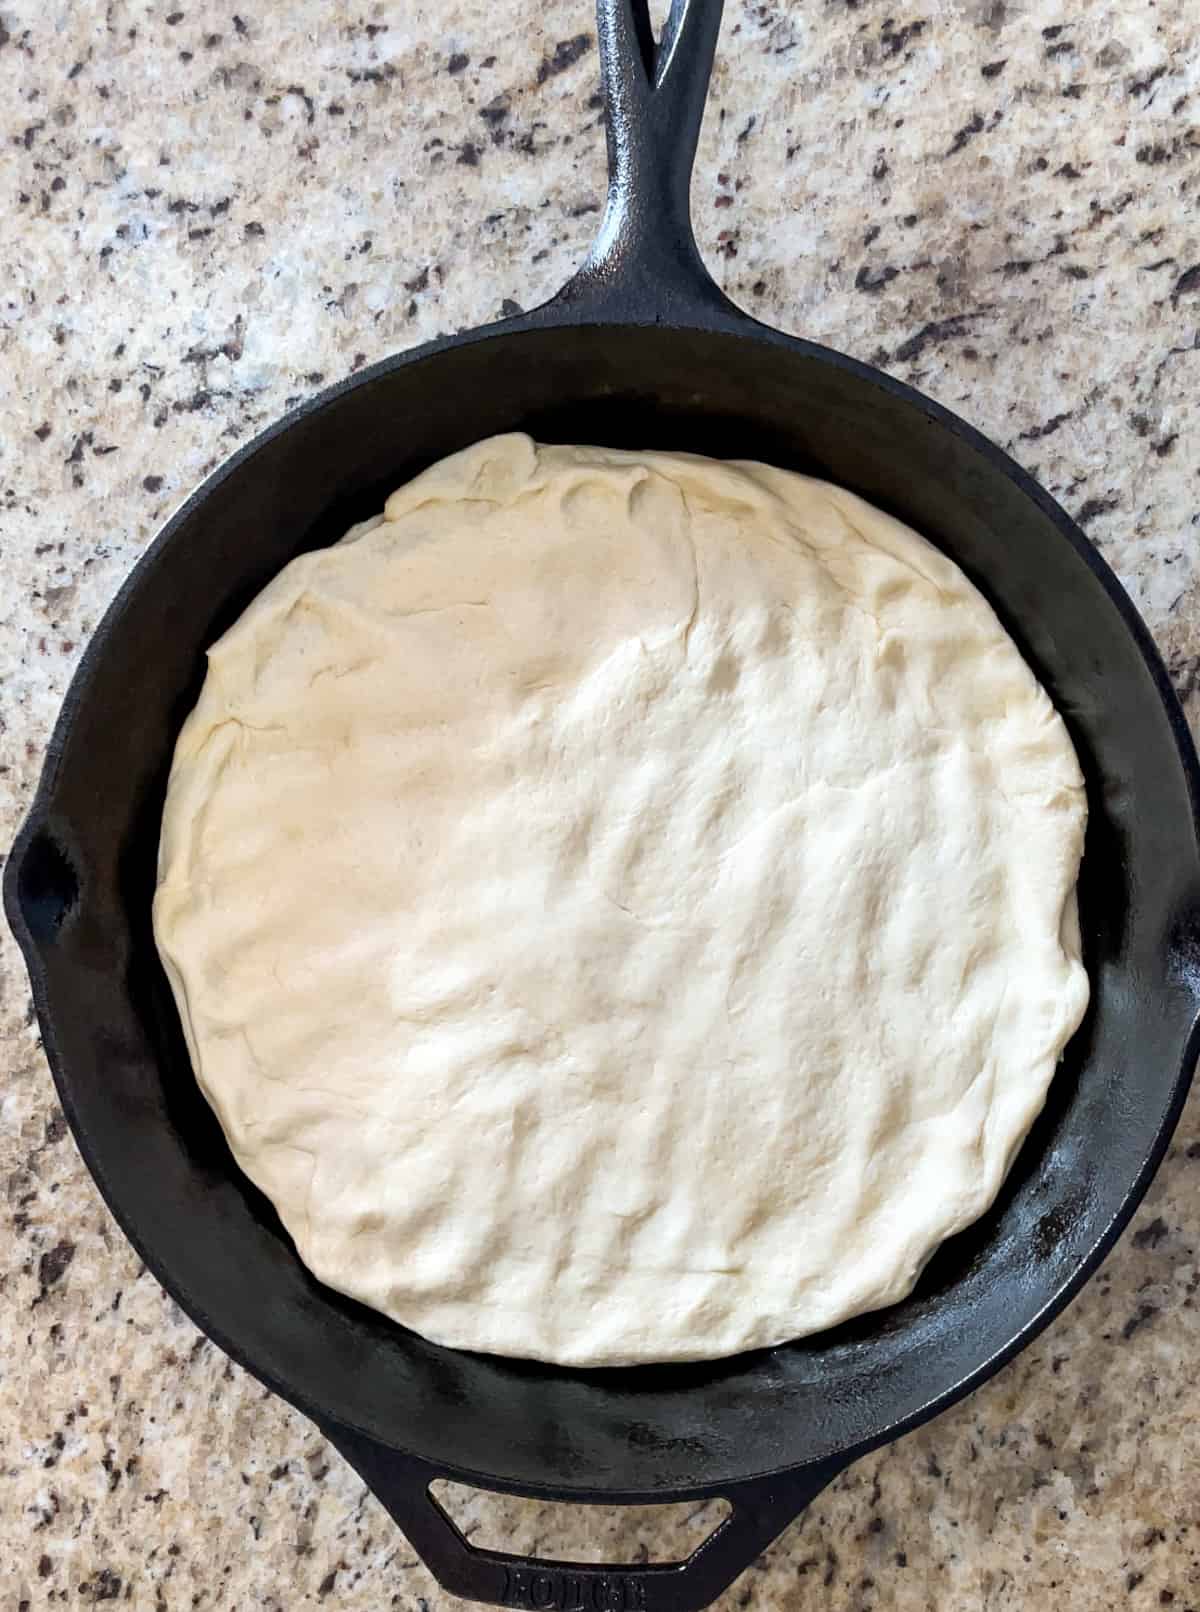 Pizza dough spread out in the bottom of a cast iron pan.